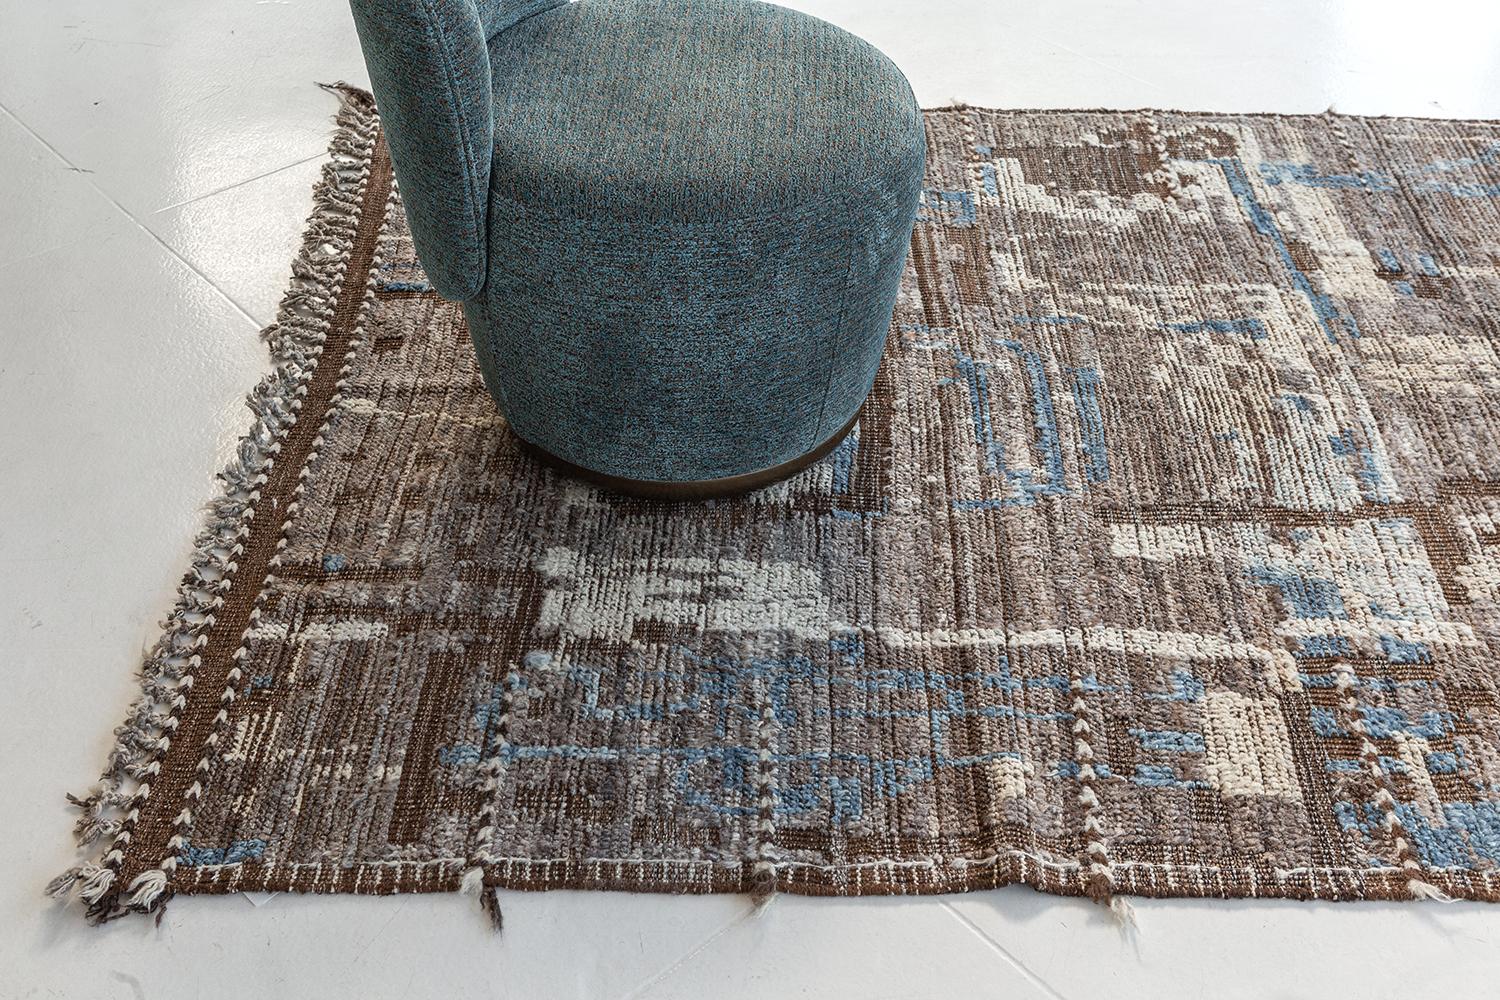 Featuring the remarkable texture and amazing play of earthy colour scheme, this breathtaking rug called Malaren’ from our Atlas collection exudes luxury and sophistication. The brilliant combination of sky blue, umber brown and taupe contributes to